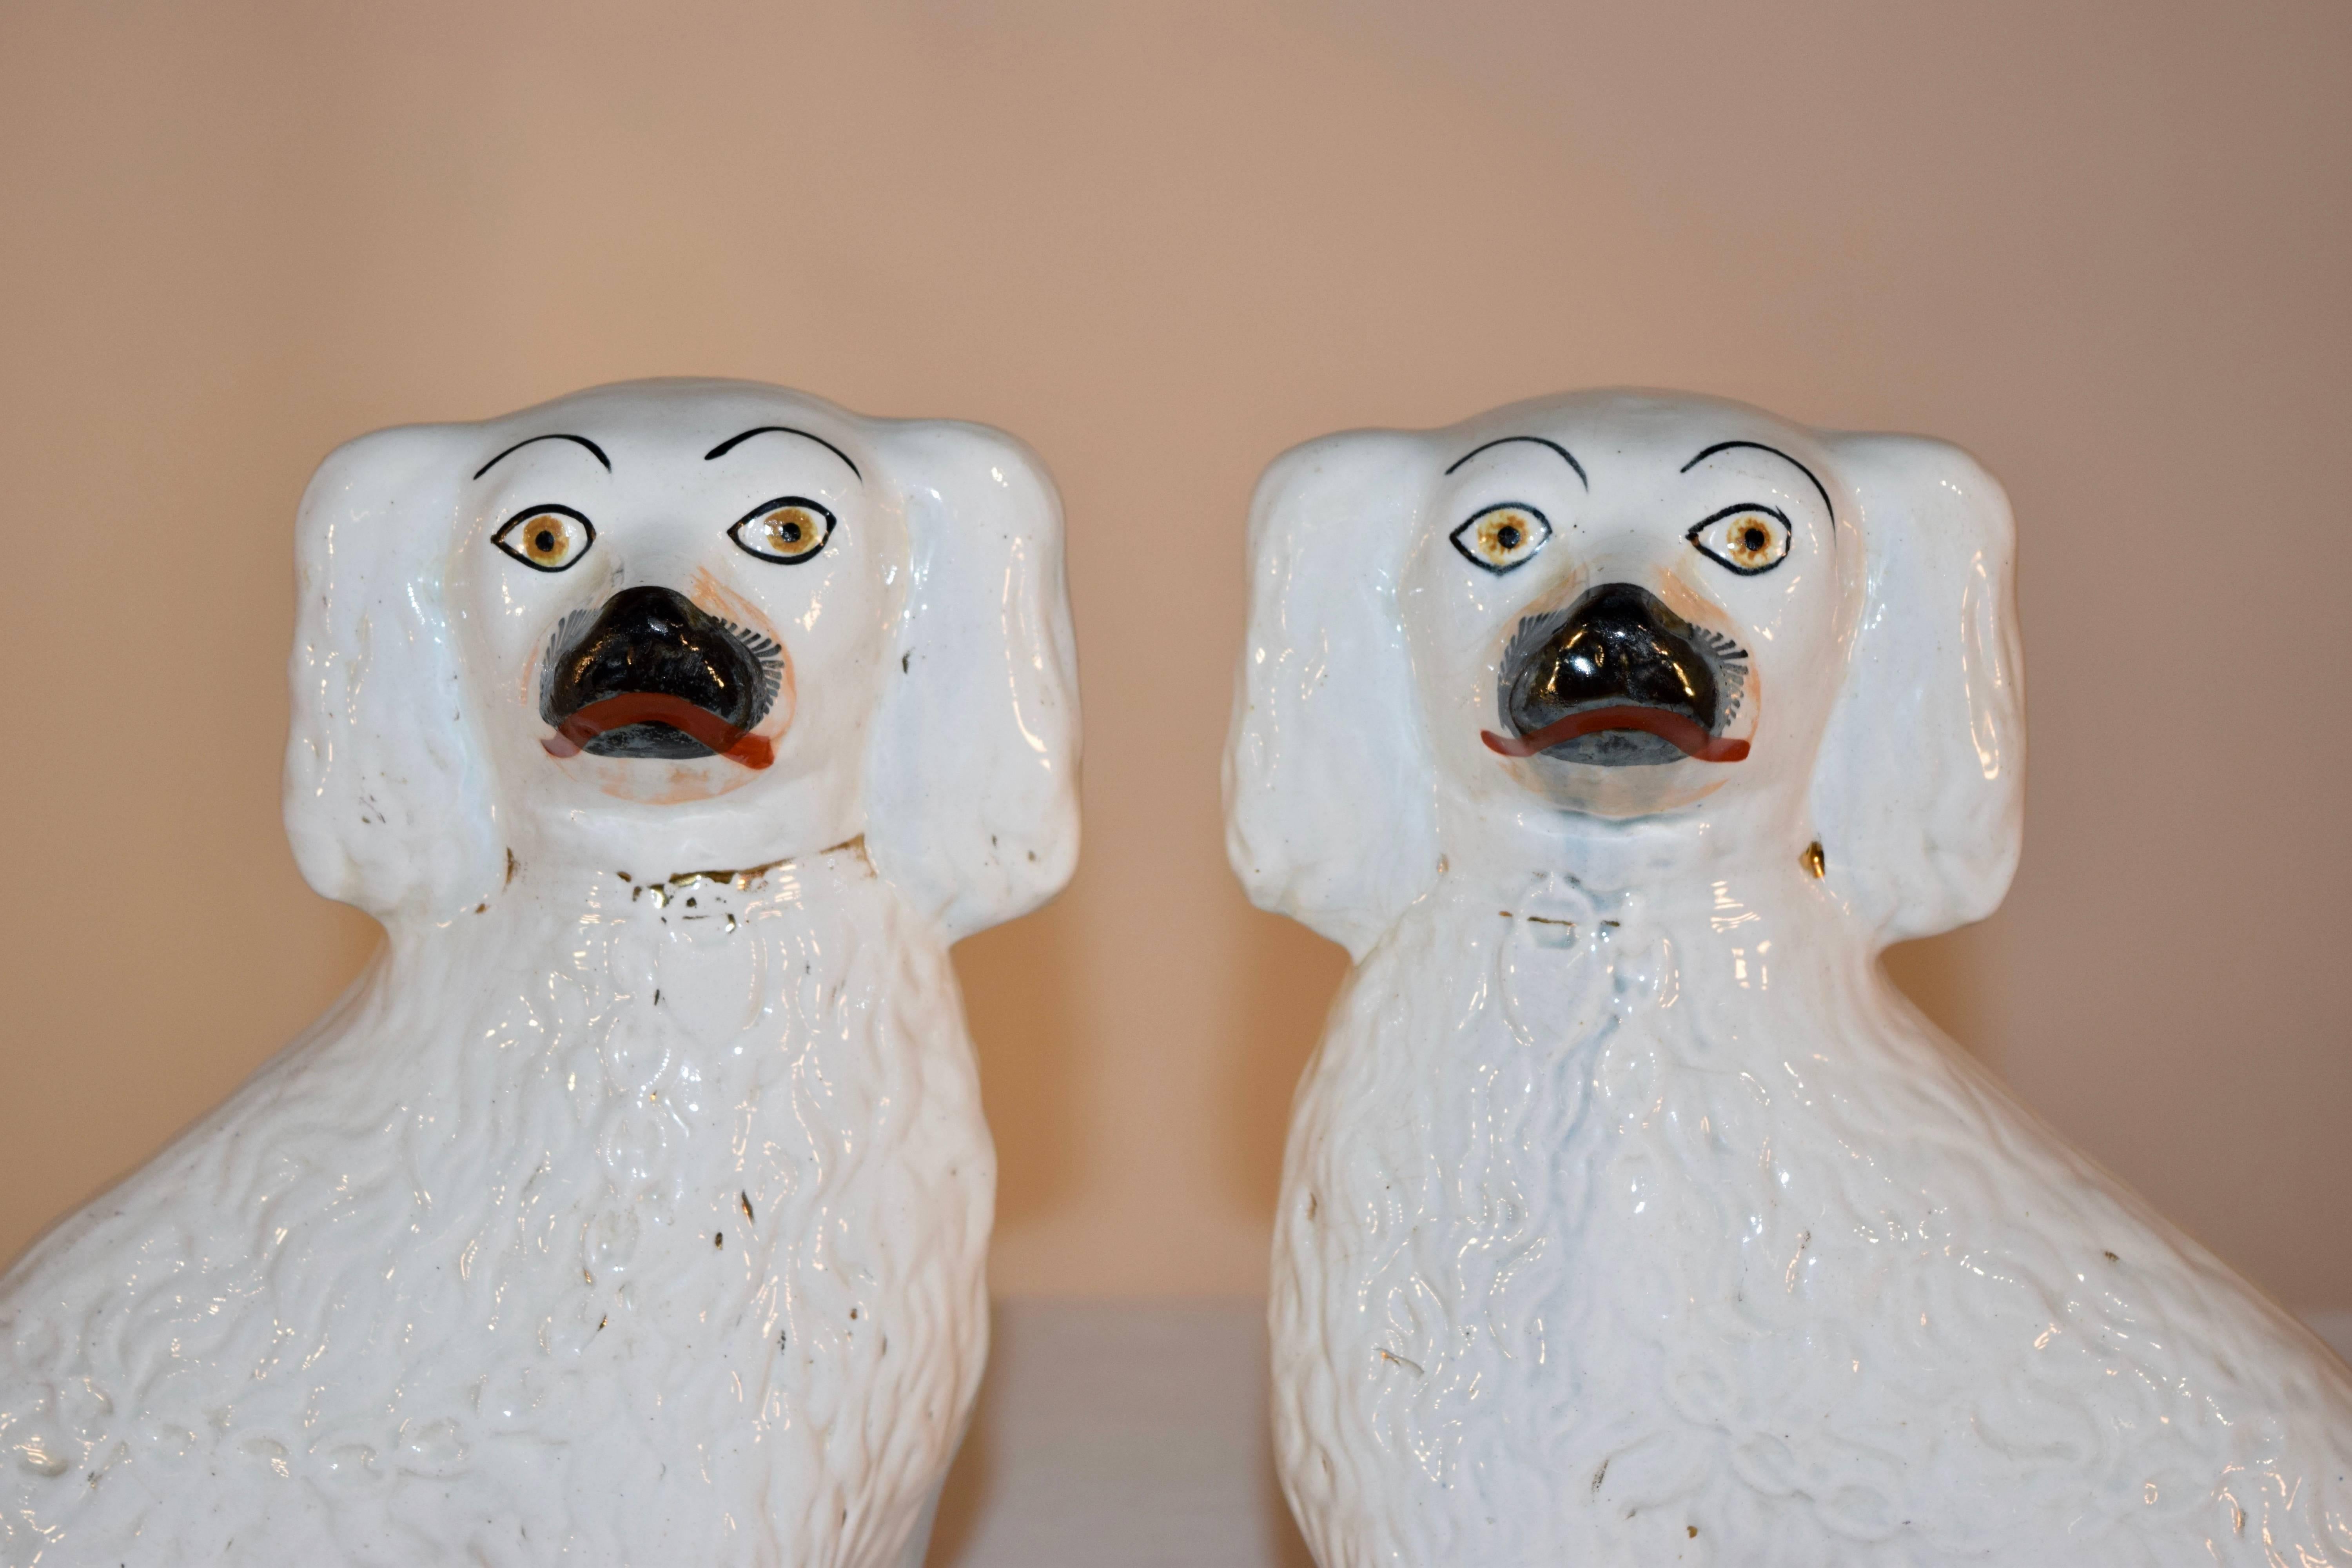 Pair of 19th century Staffordshire spaniels from England with remnants of gold decoration and great curly tails. General wear for age.